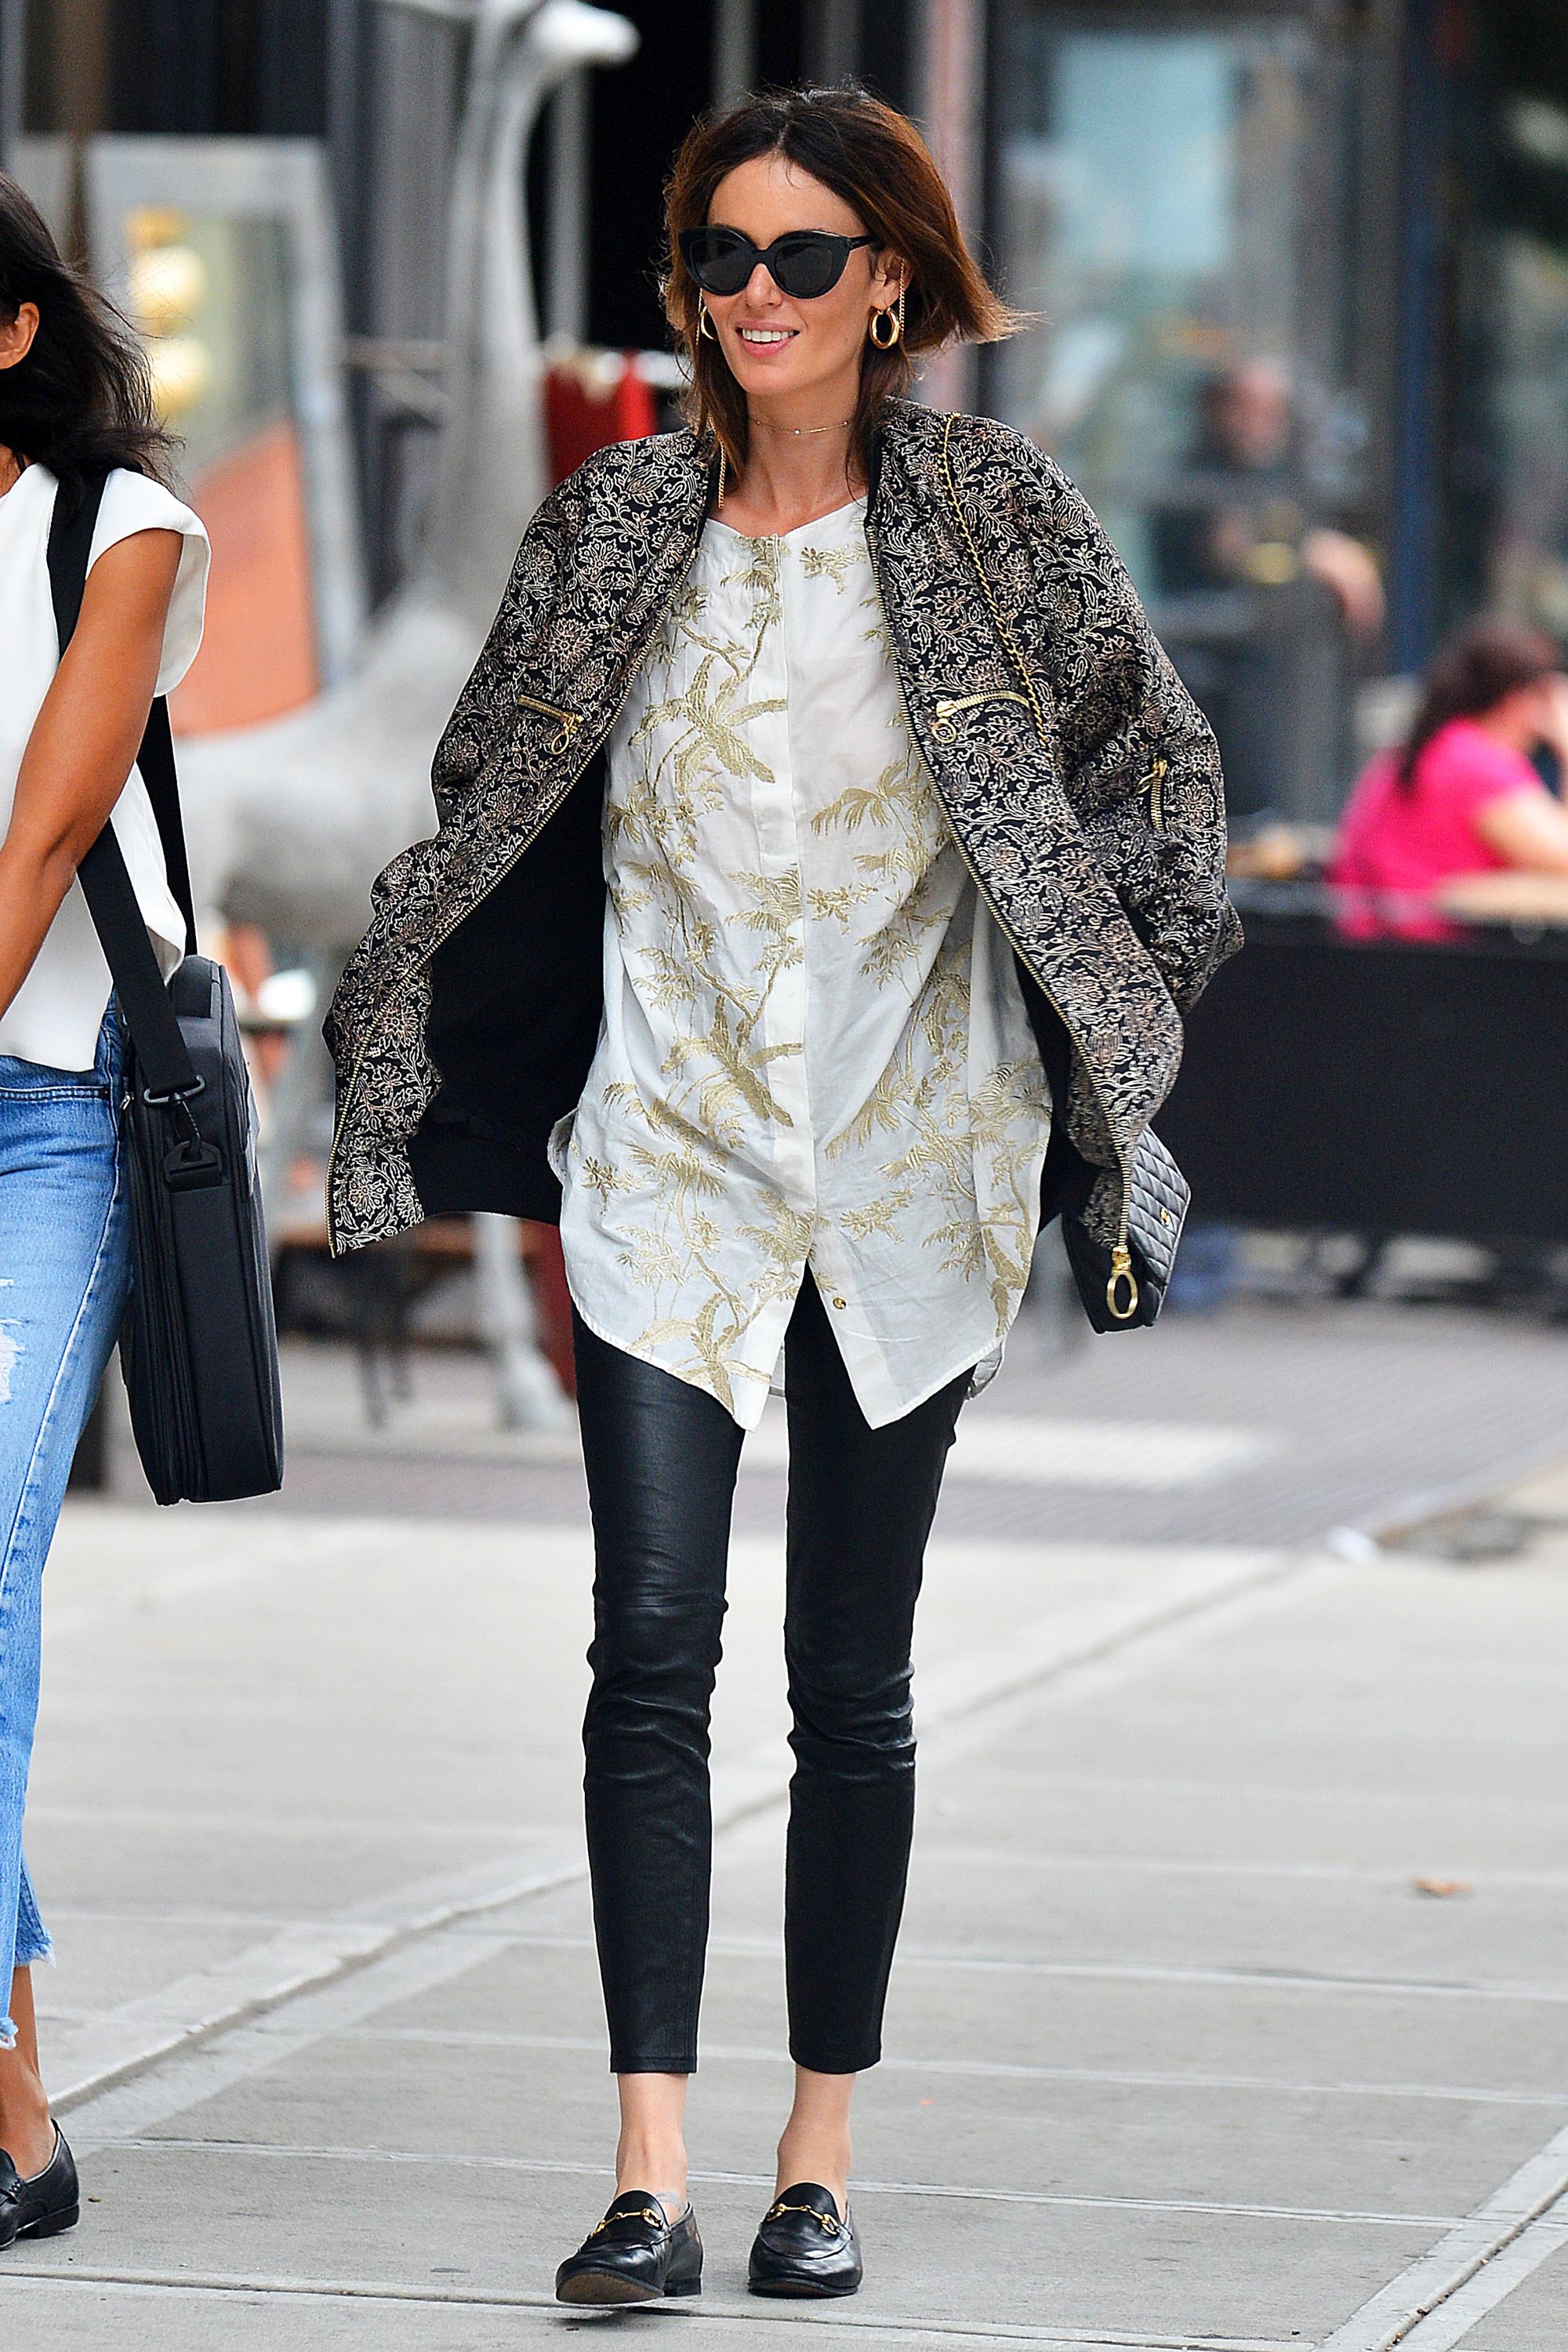 Nicole Trunfio is spotted out in New York City